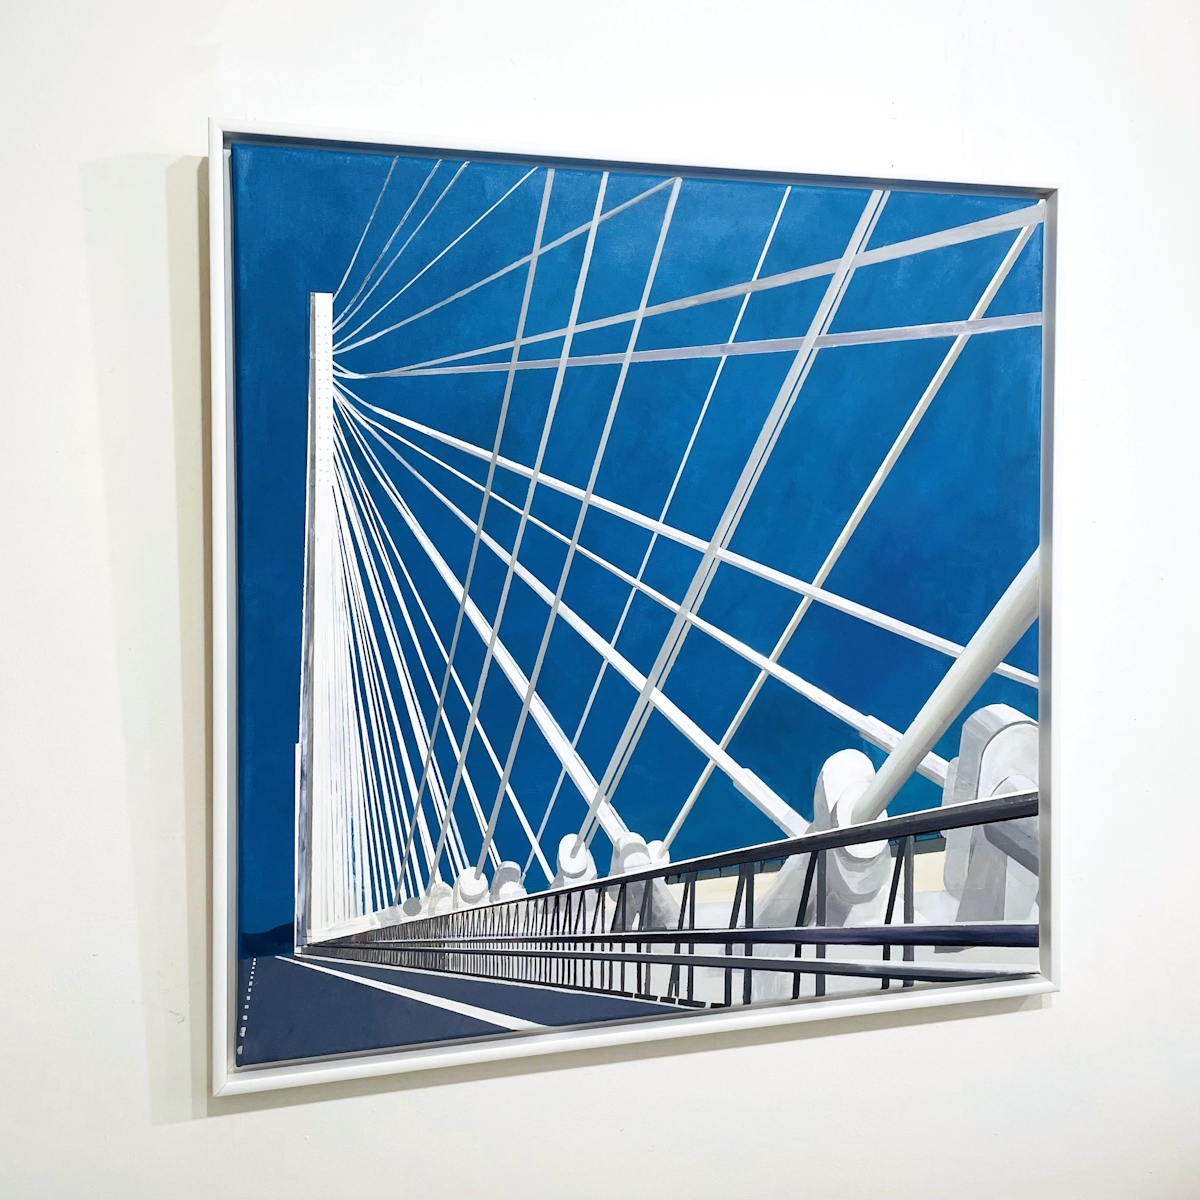 'Queensferry Crossing' by artist Judith Appleby